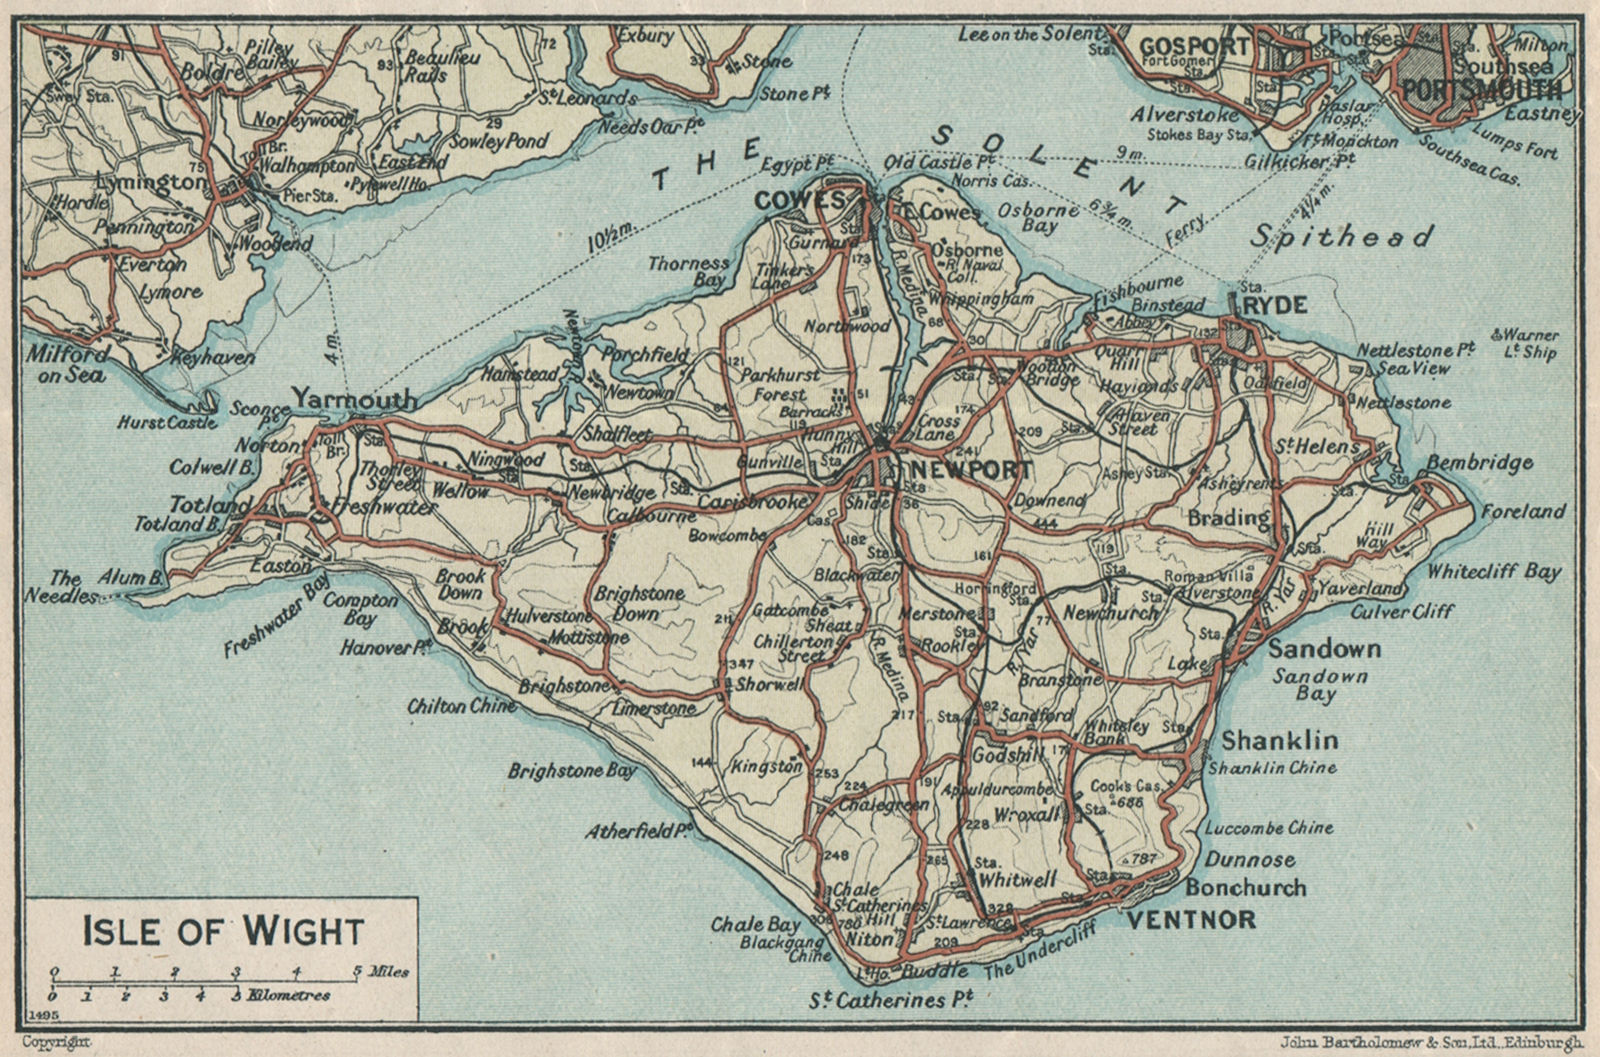 ISLE OF WIGHT. Vintage map plan. Isle of Wight 1930 old vintage chart